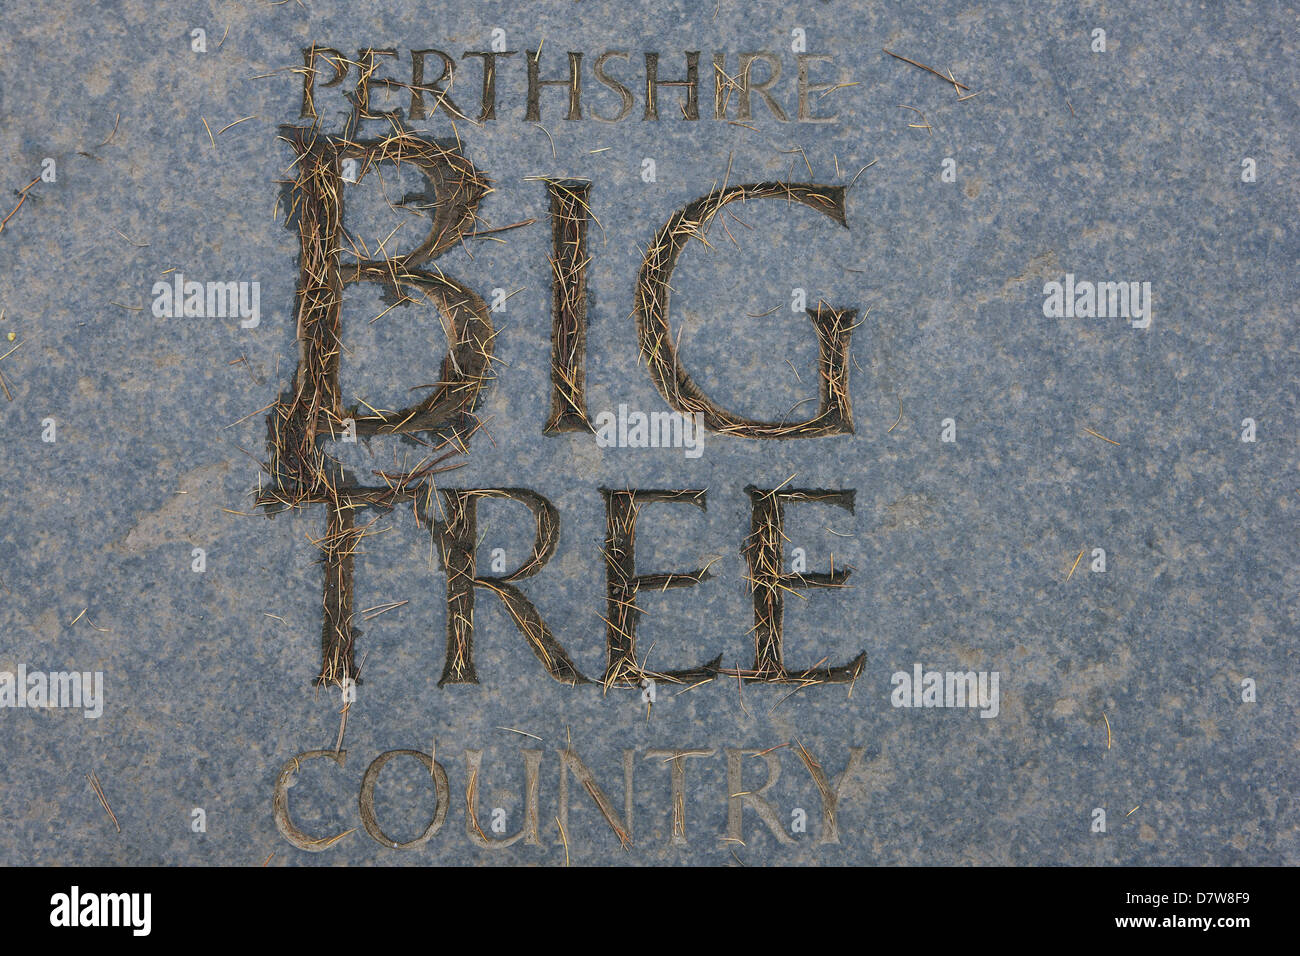 Perthshire Big Tree Country engraving on a slab at the Queen's View near Pitlochry Stock Photo